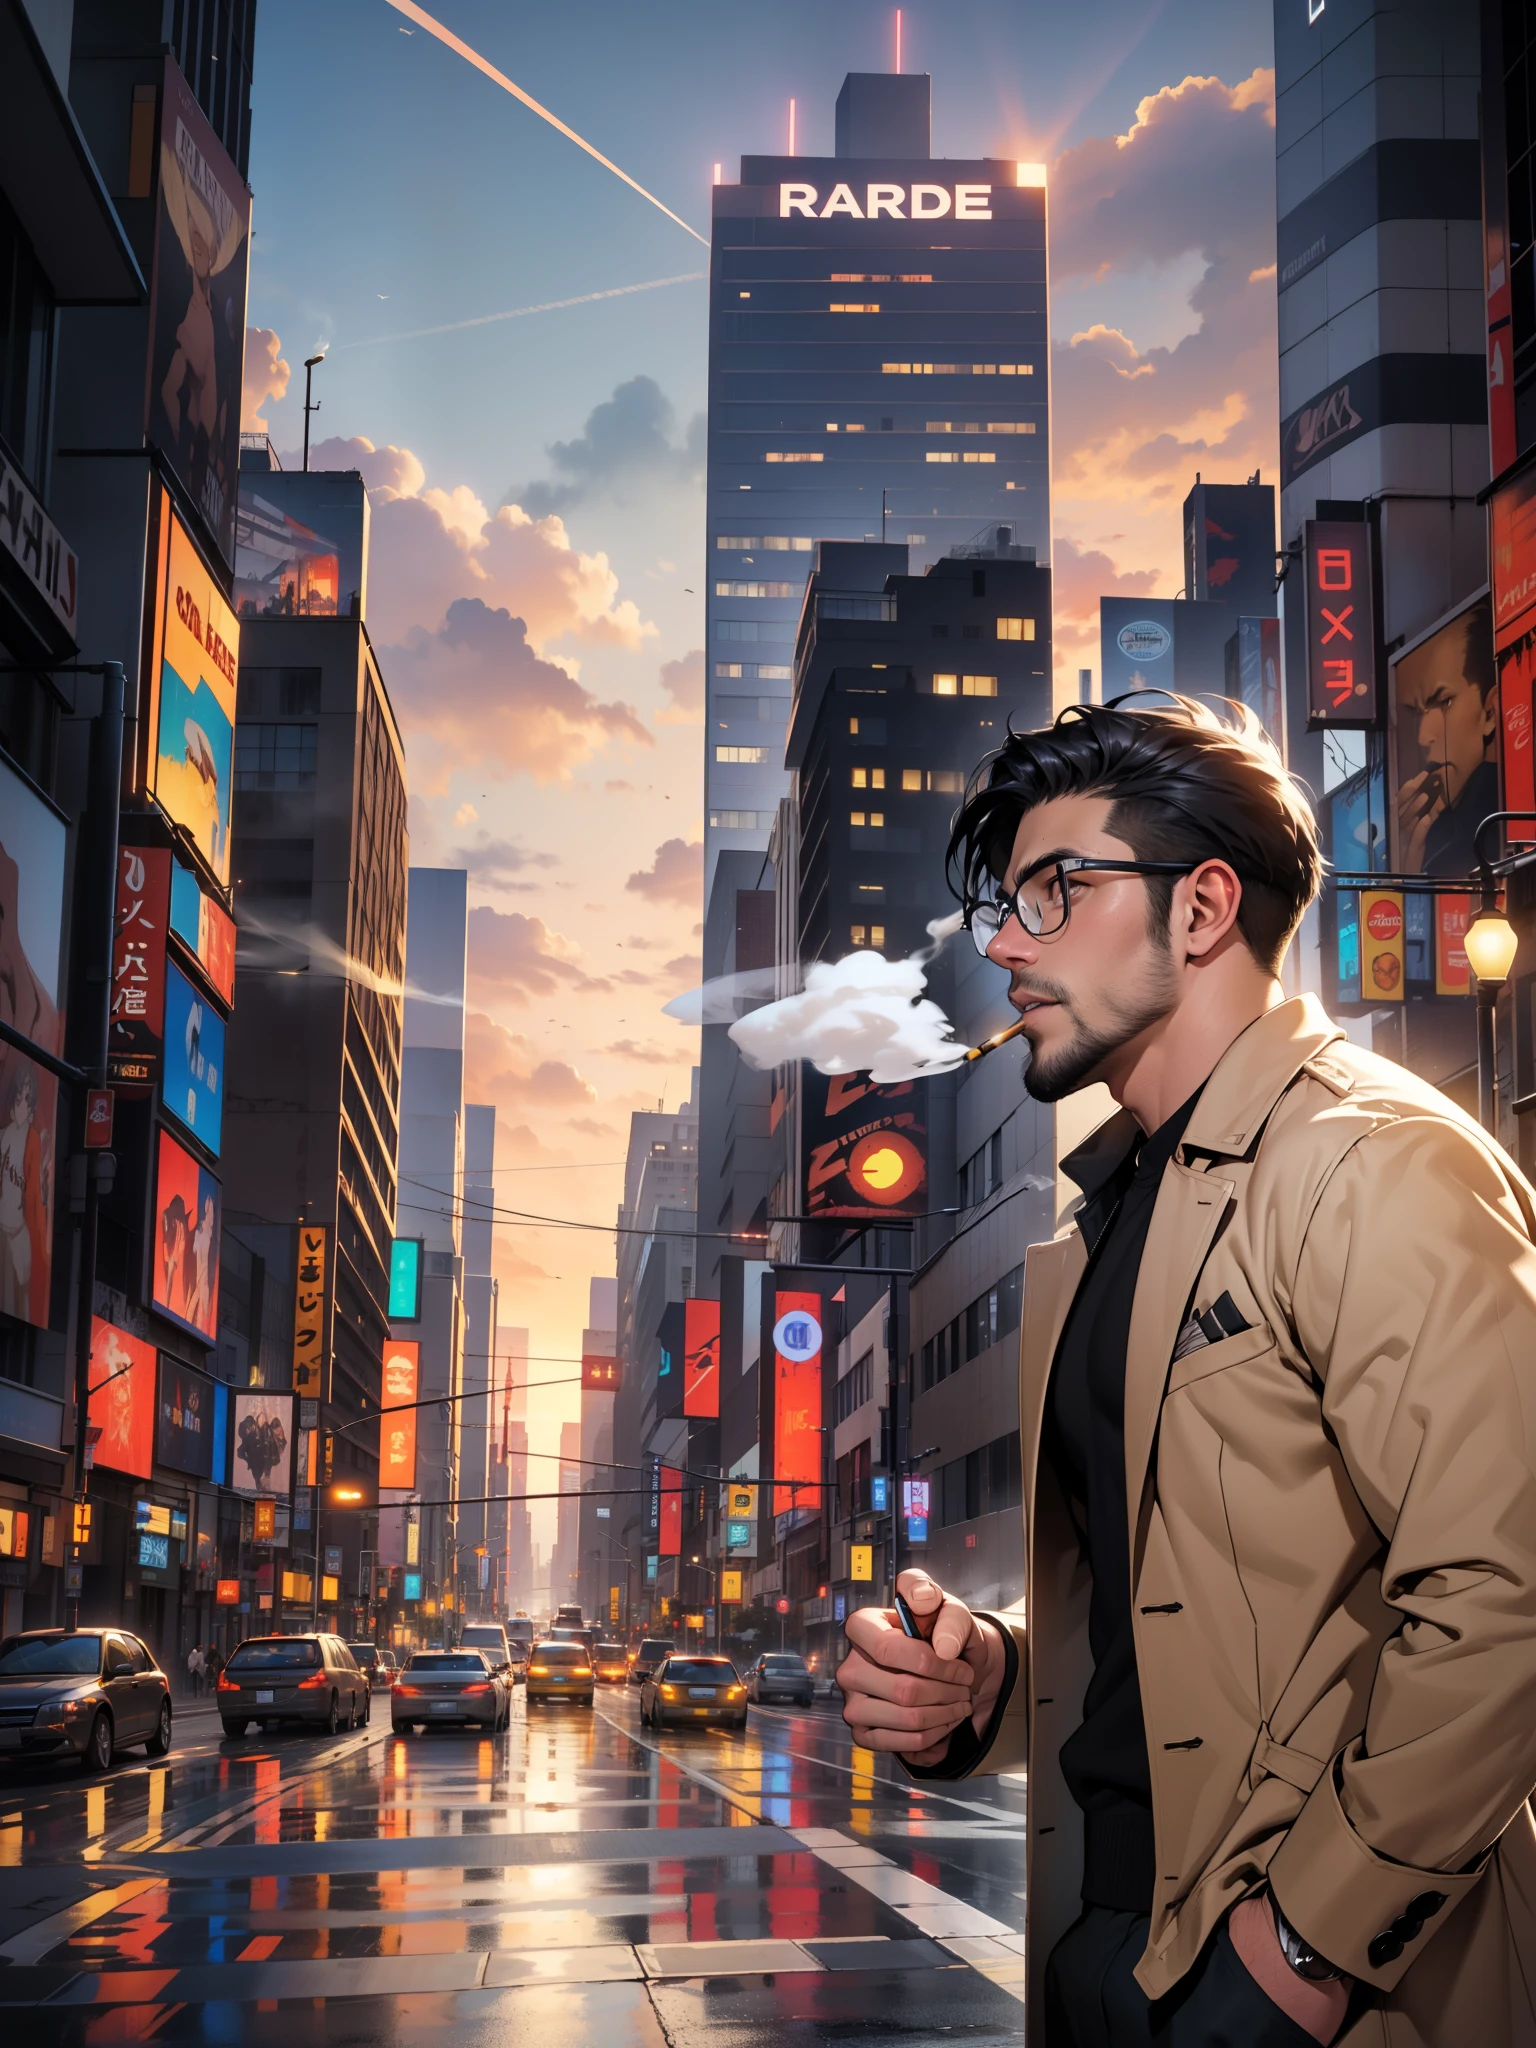 masterpiece, best quality, highres, upper body shot, ((wide angle)), zoom out, middle-aged man, macho, daddy, beefy, burly, hairy, manly, really tall, black  hair, wearing a smooth silk black trench coat, grey shirt, wearing glasses, standing in the middle of a New York's crossroad, standing in the center of the shot, smoking a cigarette, blowing smoke out from the mouth, looking up to the sky, left hand in the pocket, (sunset), afternoon, golden hour, golden sky color, dark buildings in the background, incredible composition, HDR, volumetric lighting, shadows, beam of sunlight shinning on the streets, seen from the side, aesthetic